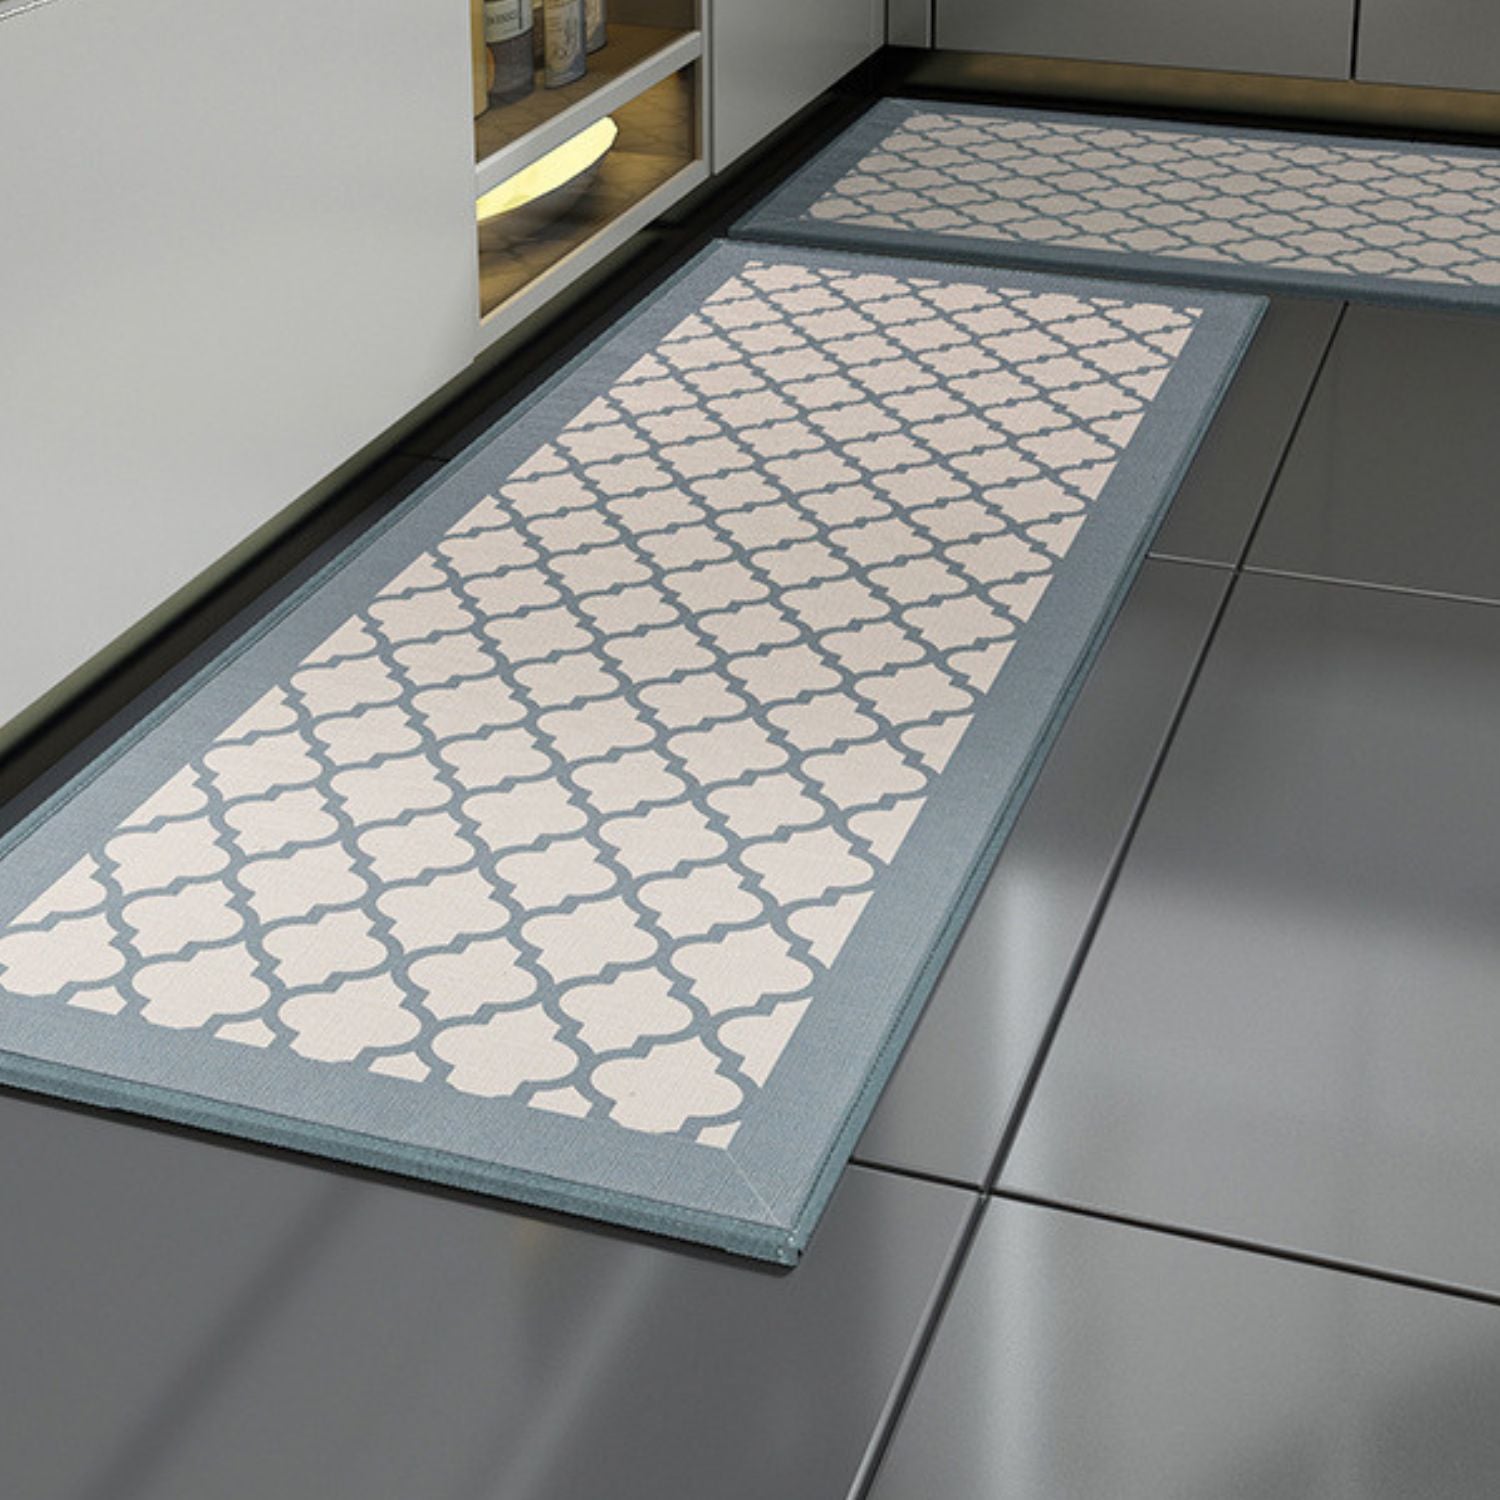 GOMINIMO 2 PCS Washable Non Slip Absorbent Kitchen Floor Mat (44x80+44x150cm, Grey Lucky Clover)